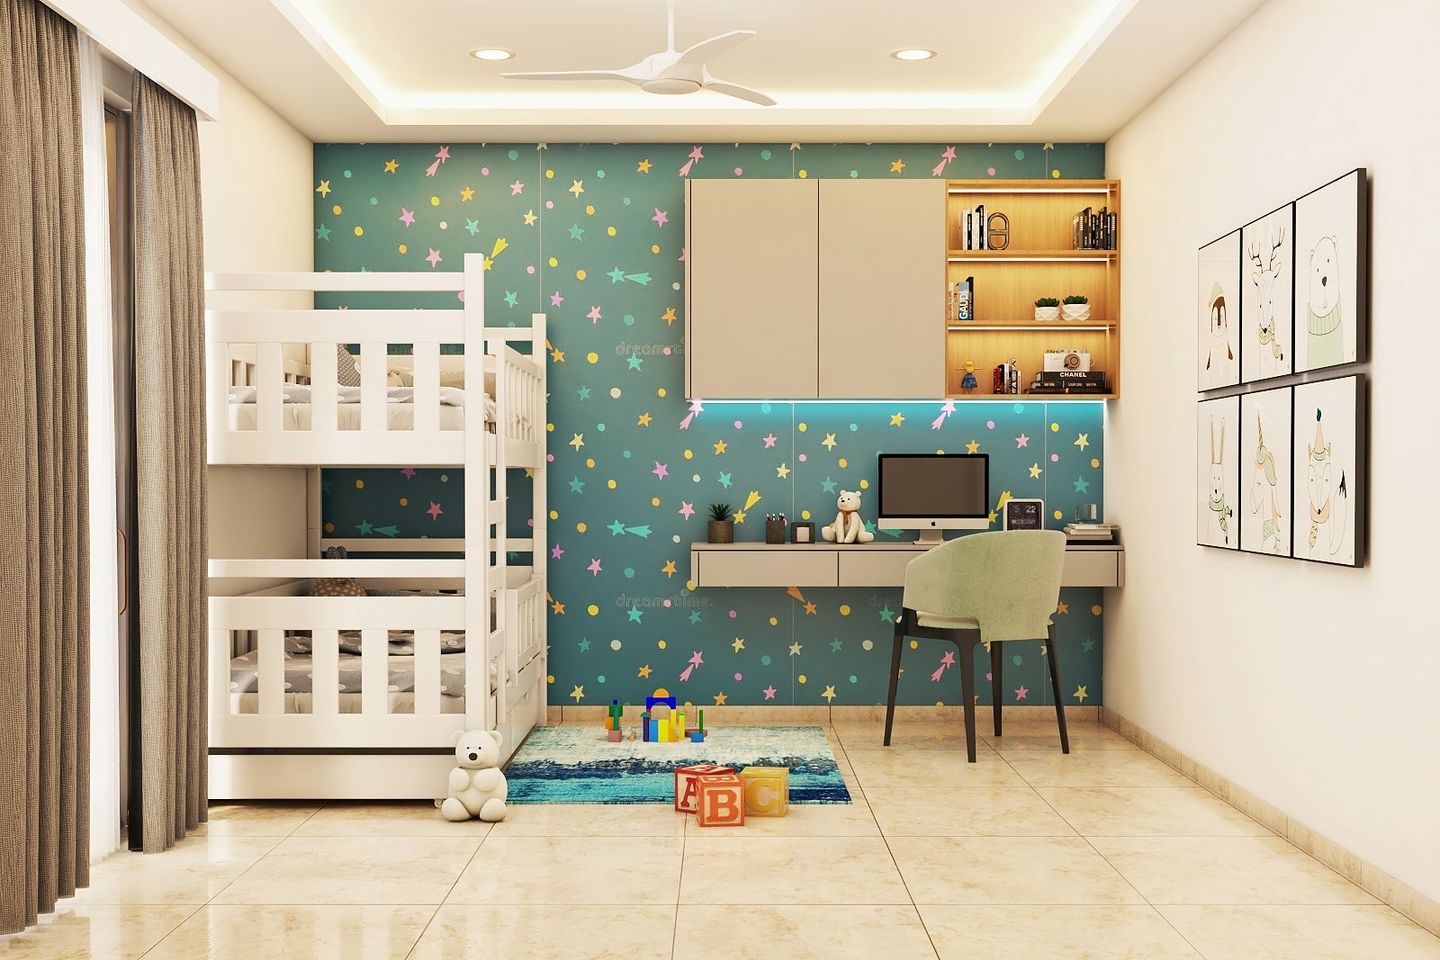 Contemporary Kid's Bedroom Design With Colourful Wallpaper - Livspace